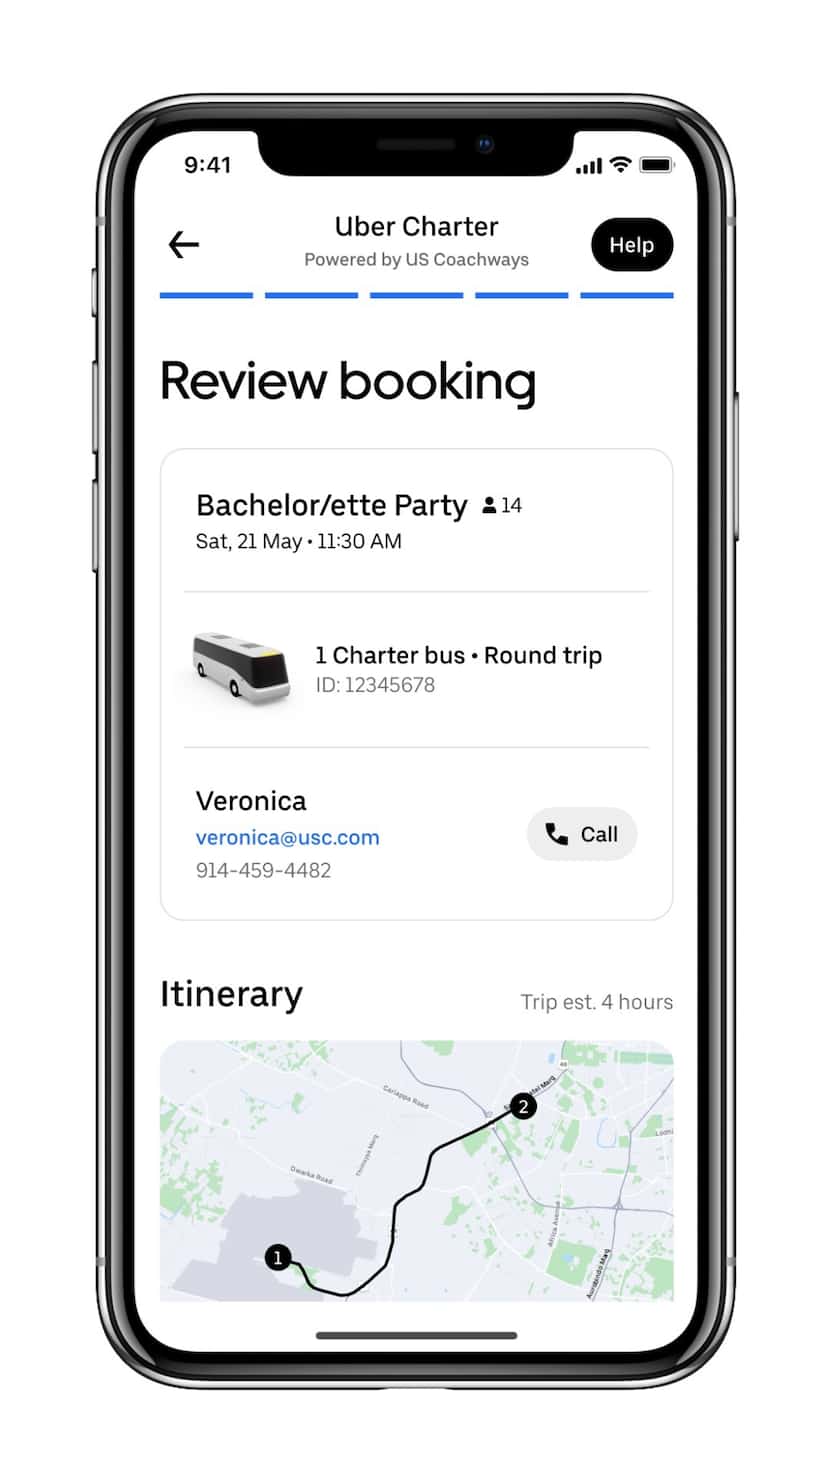 A phone shows the review screen of an Uber Charter booking.